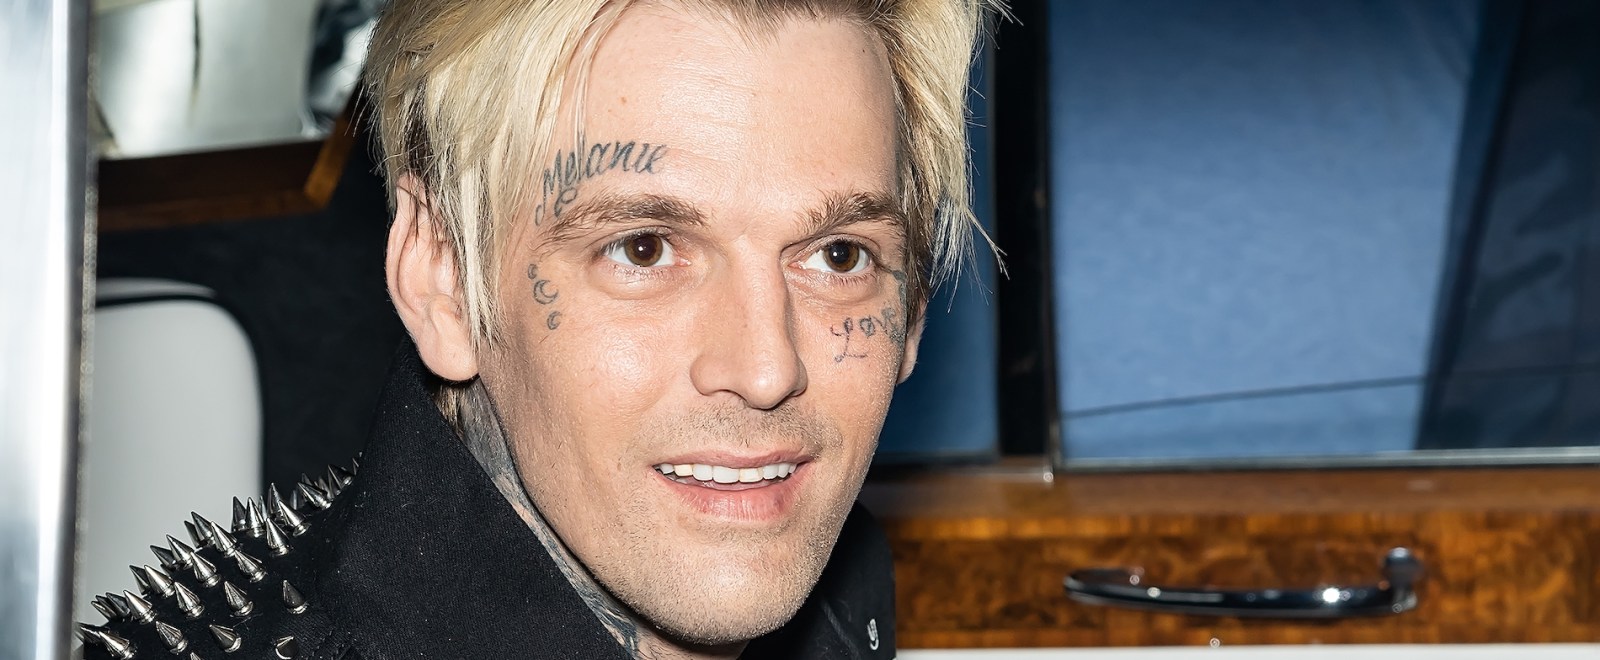 Fans Are Mad After The Grammys Left Aaron Carter, Modest Mouse’s